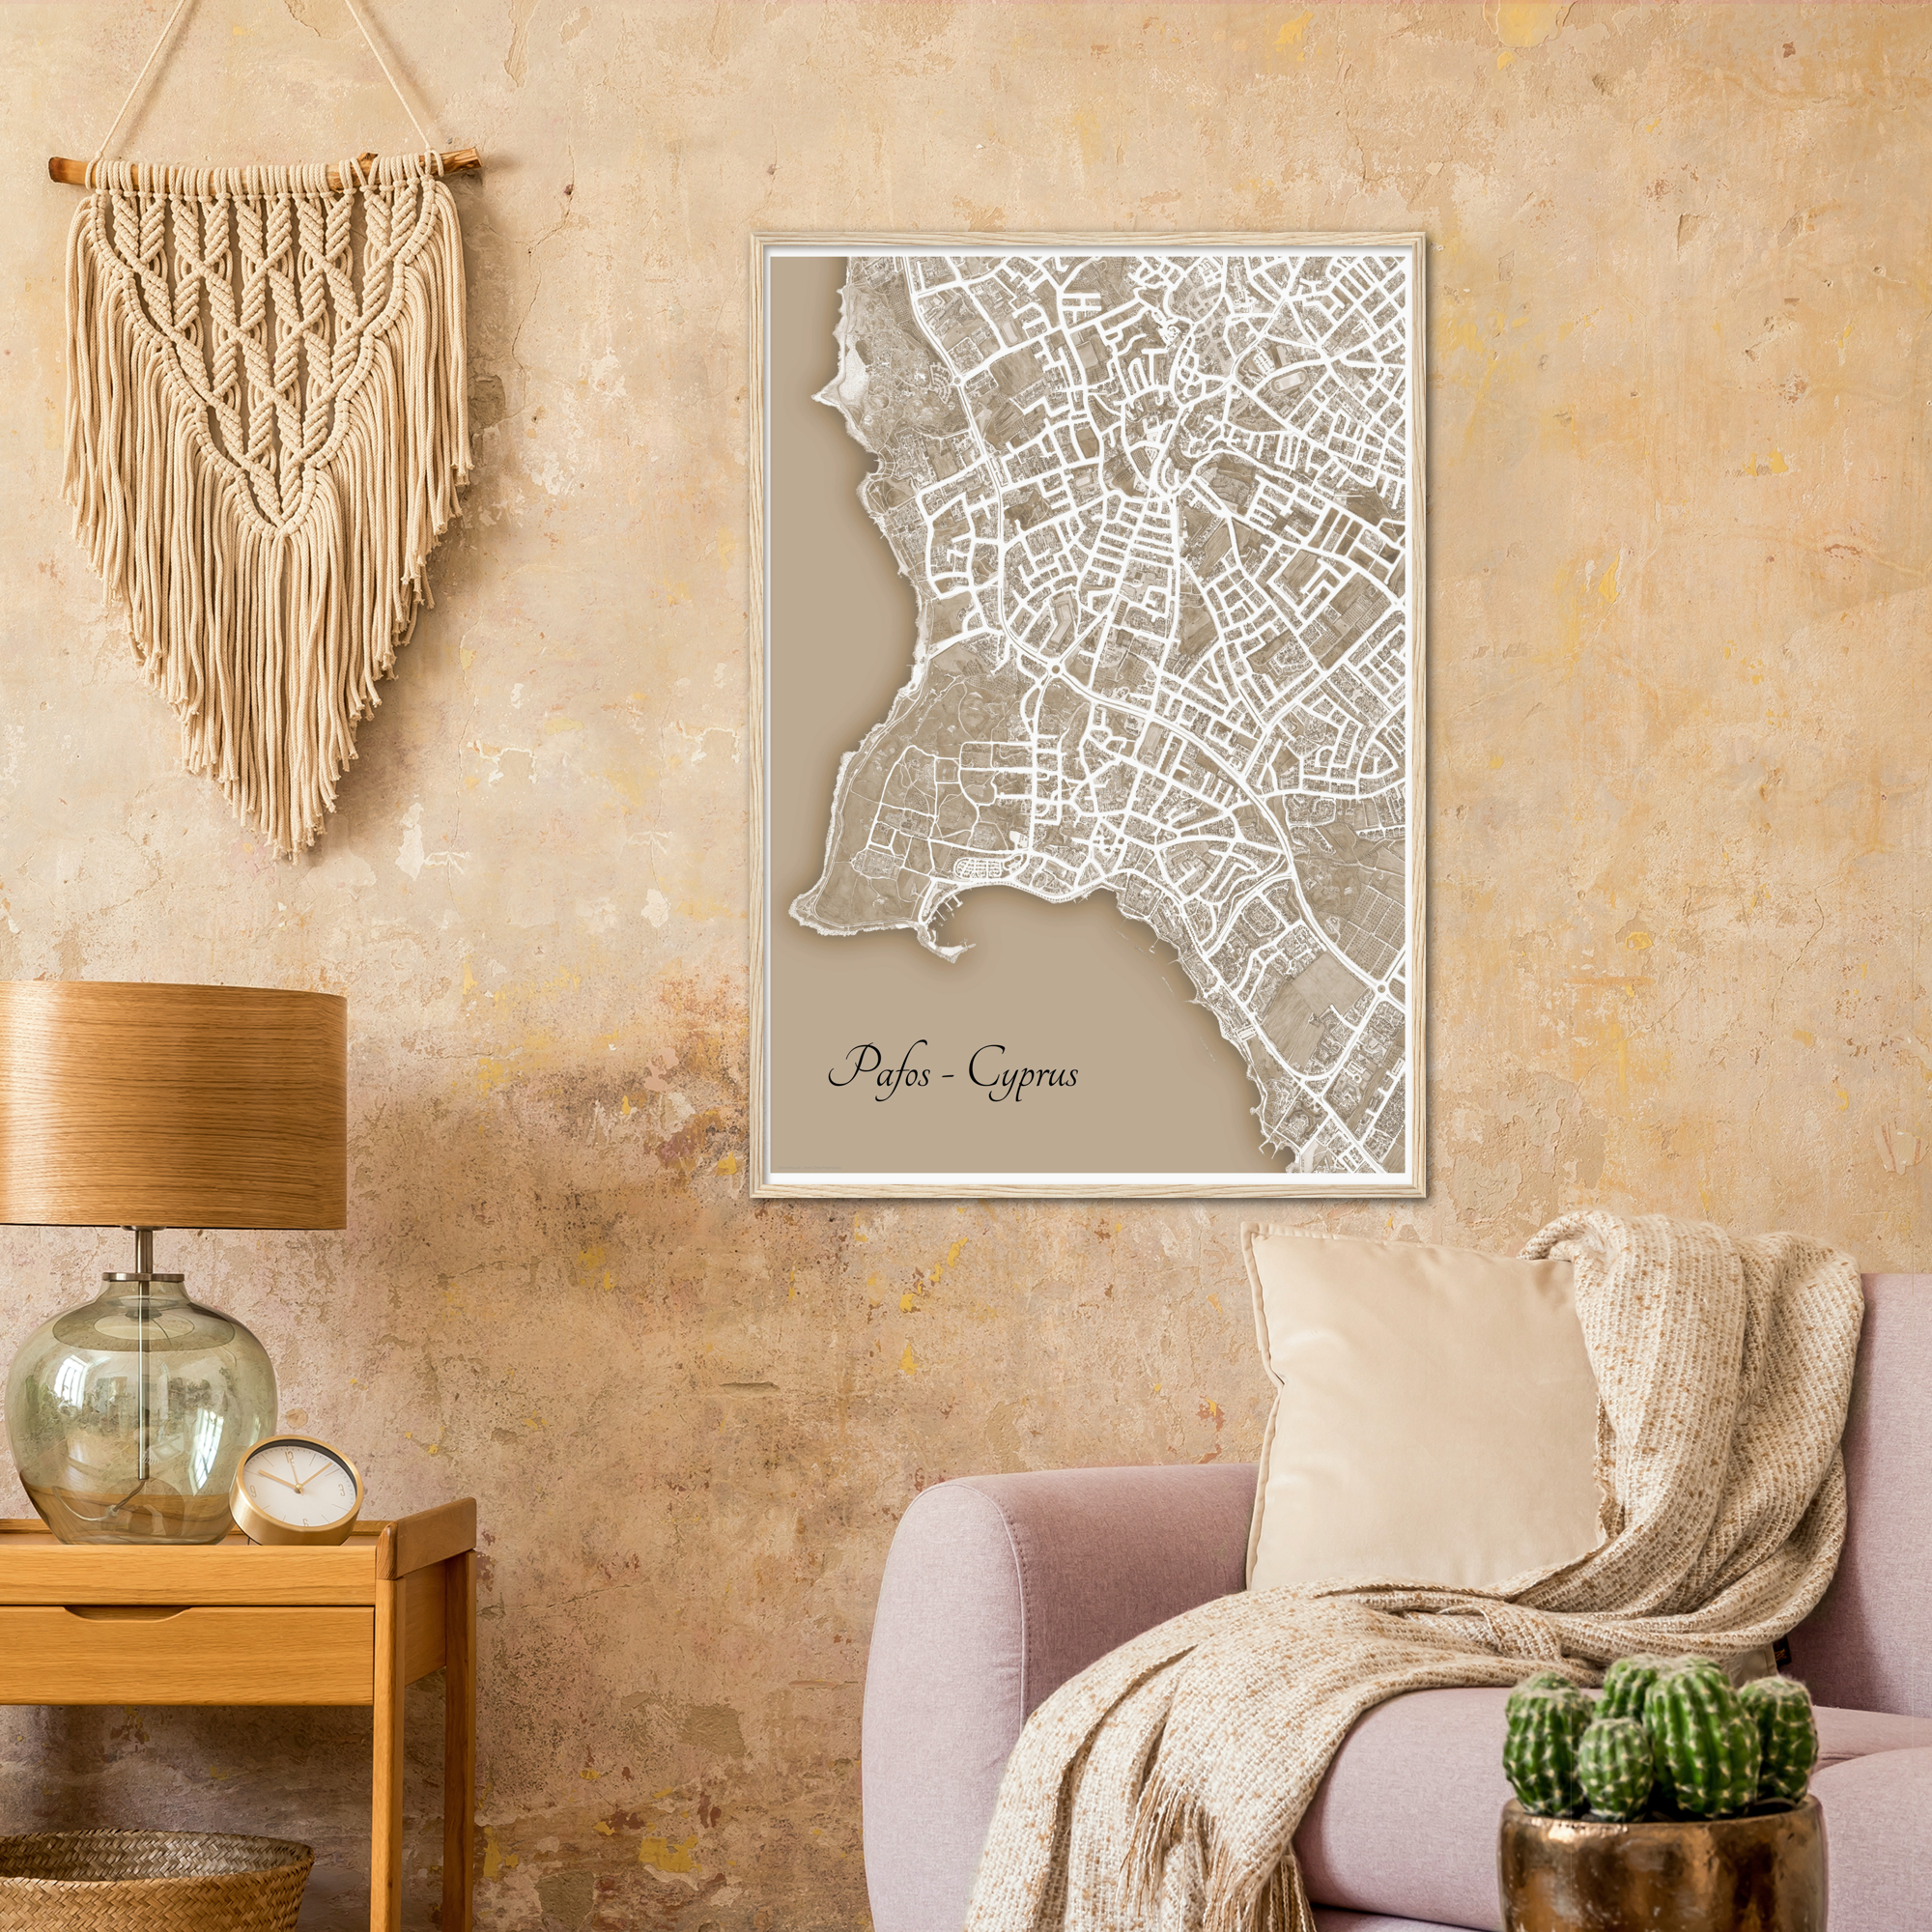 Pafos, Cyprus – Sepia Print – Wooden Framed Poster